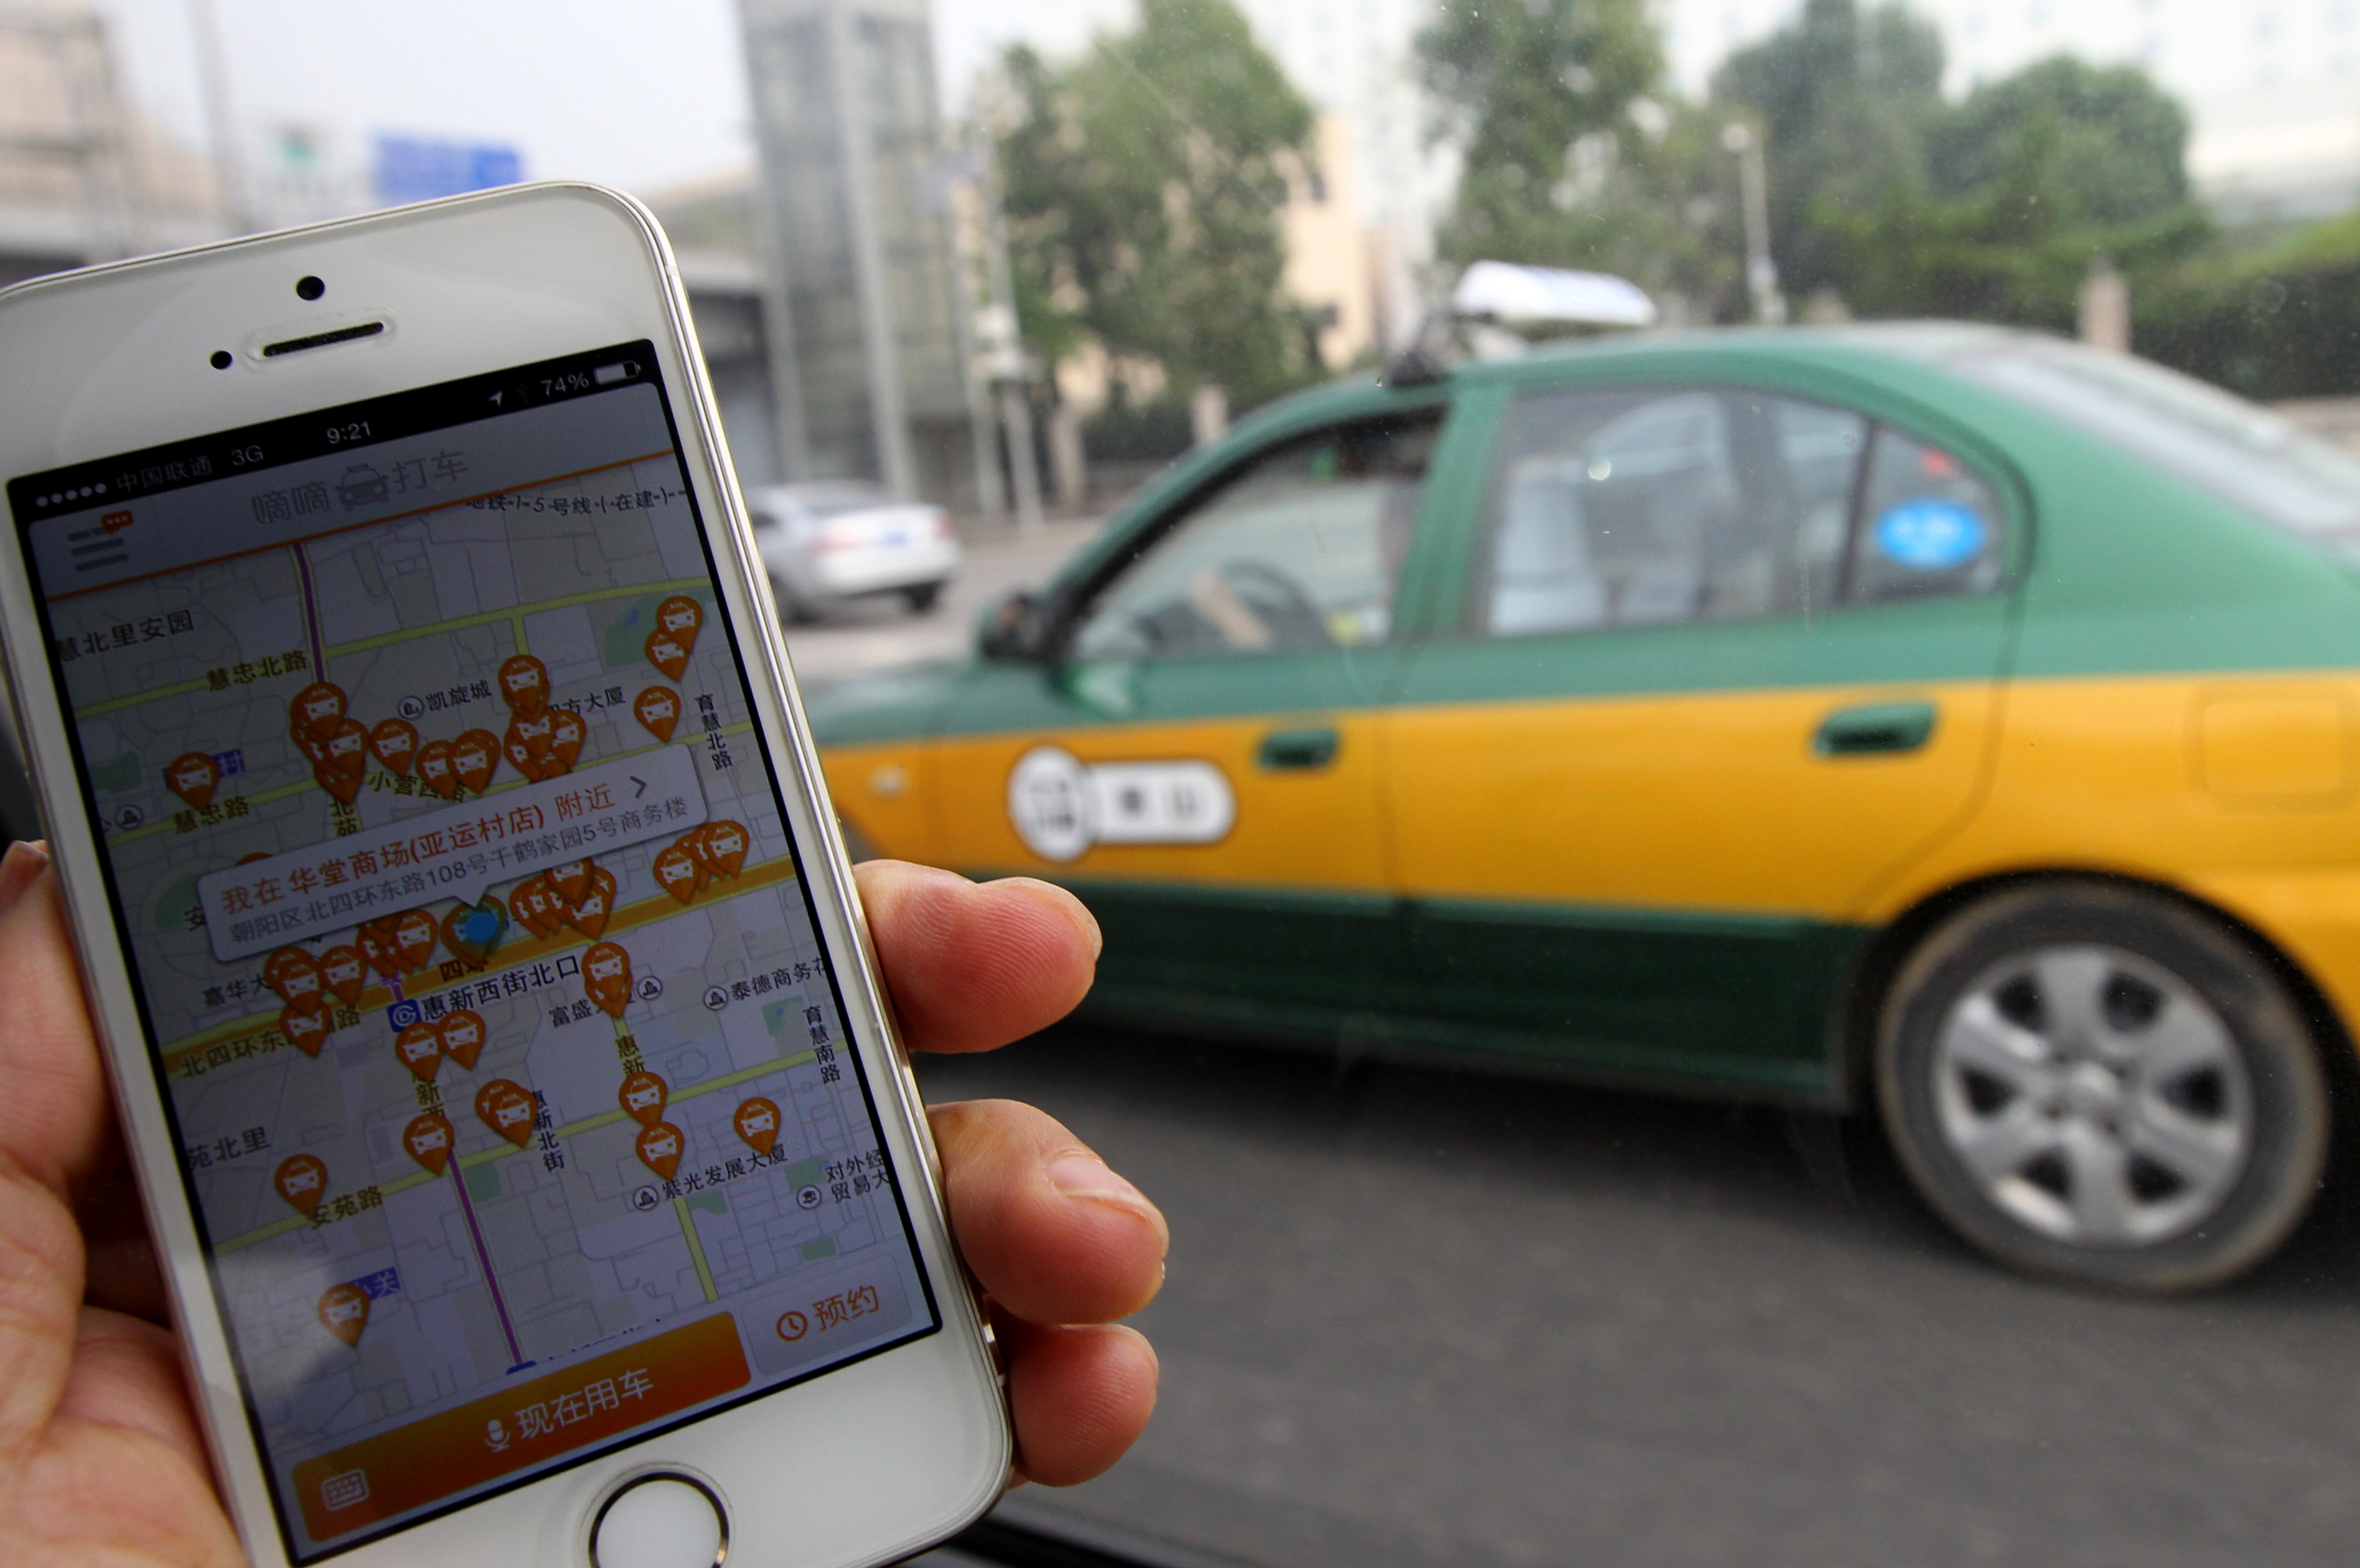 Didi Kuaidi is now in a position to bankroll more services for passengers and drivers in China. Photo: Simon song